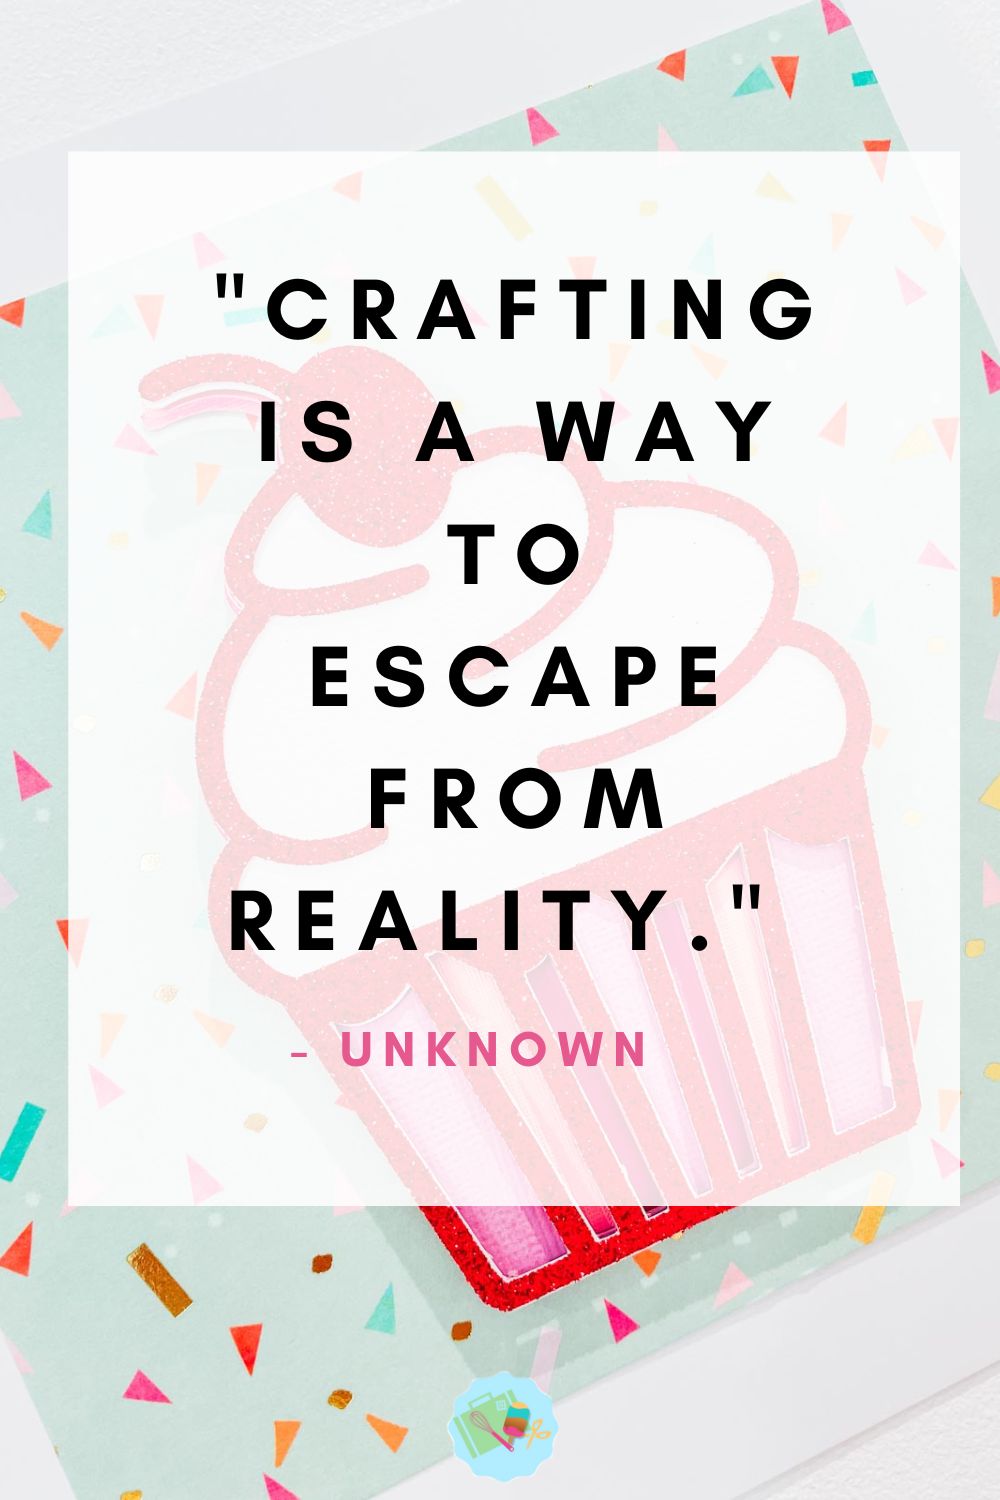 Crafting is a way to escape from reality. Craft Quotes for decorating your craft room